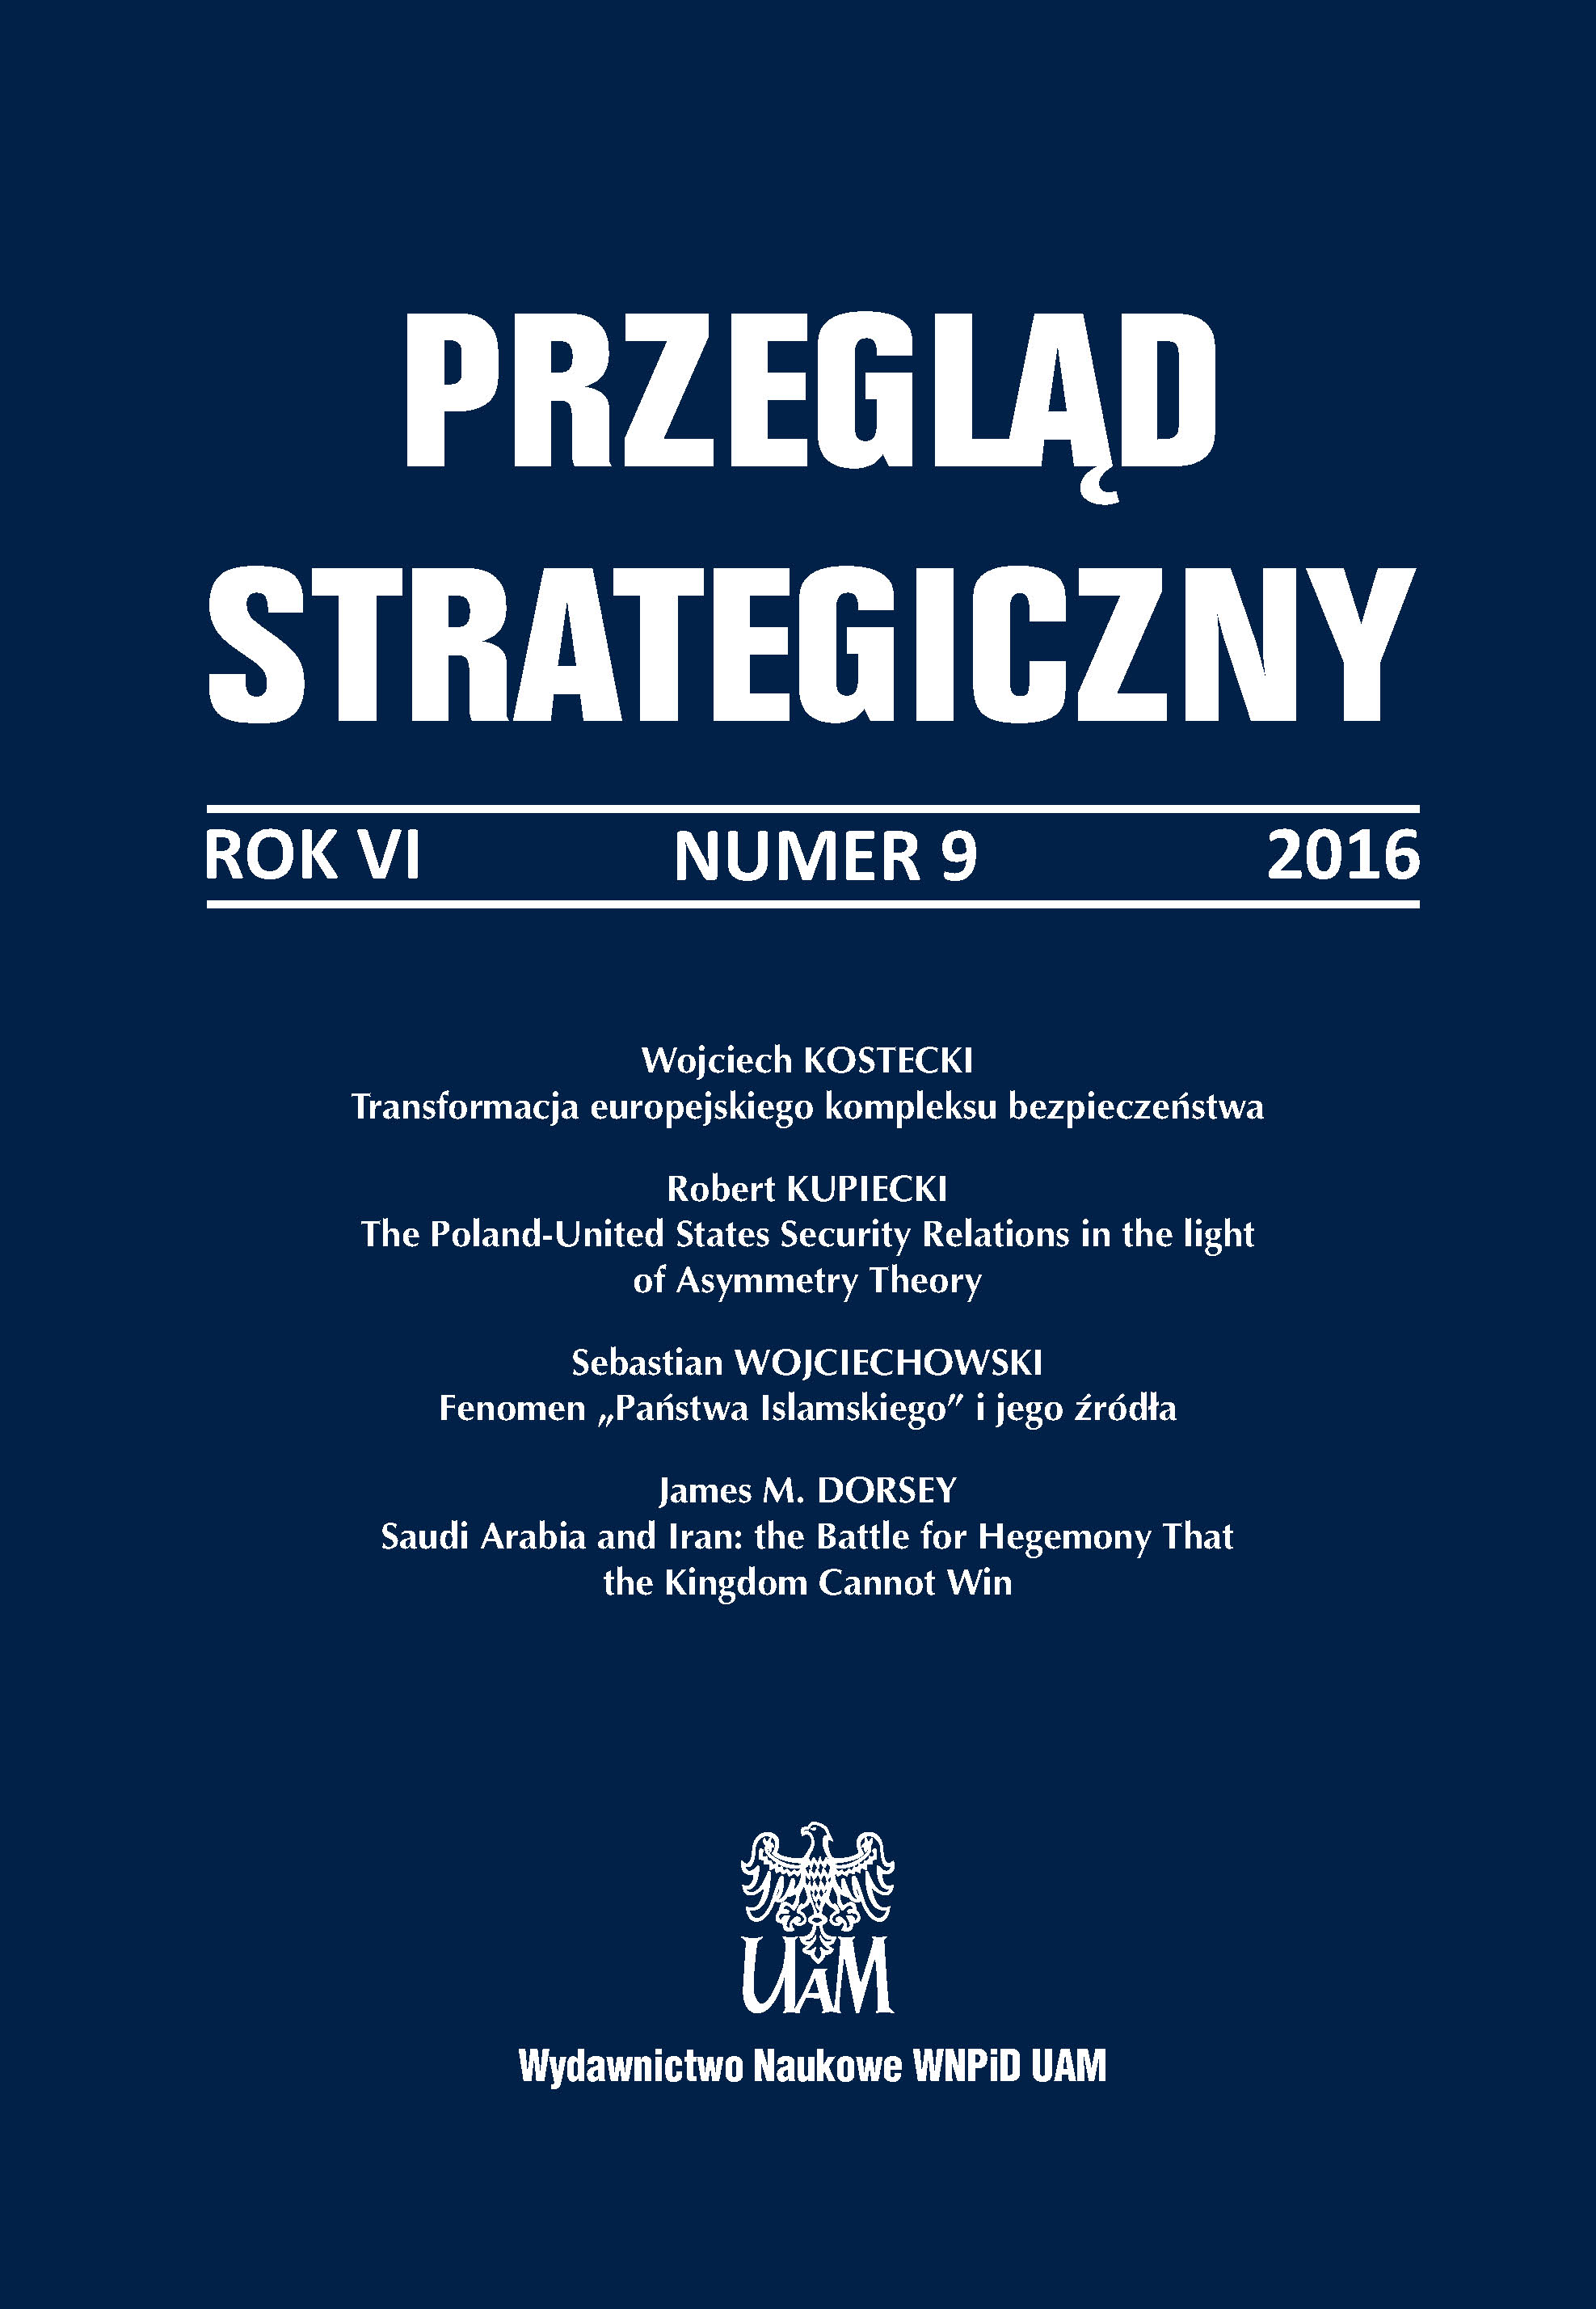 Poland in the European Union – reaching beyond the liberal perspective of analysis